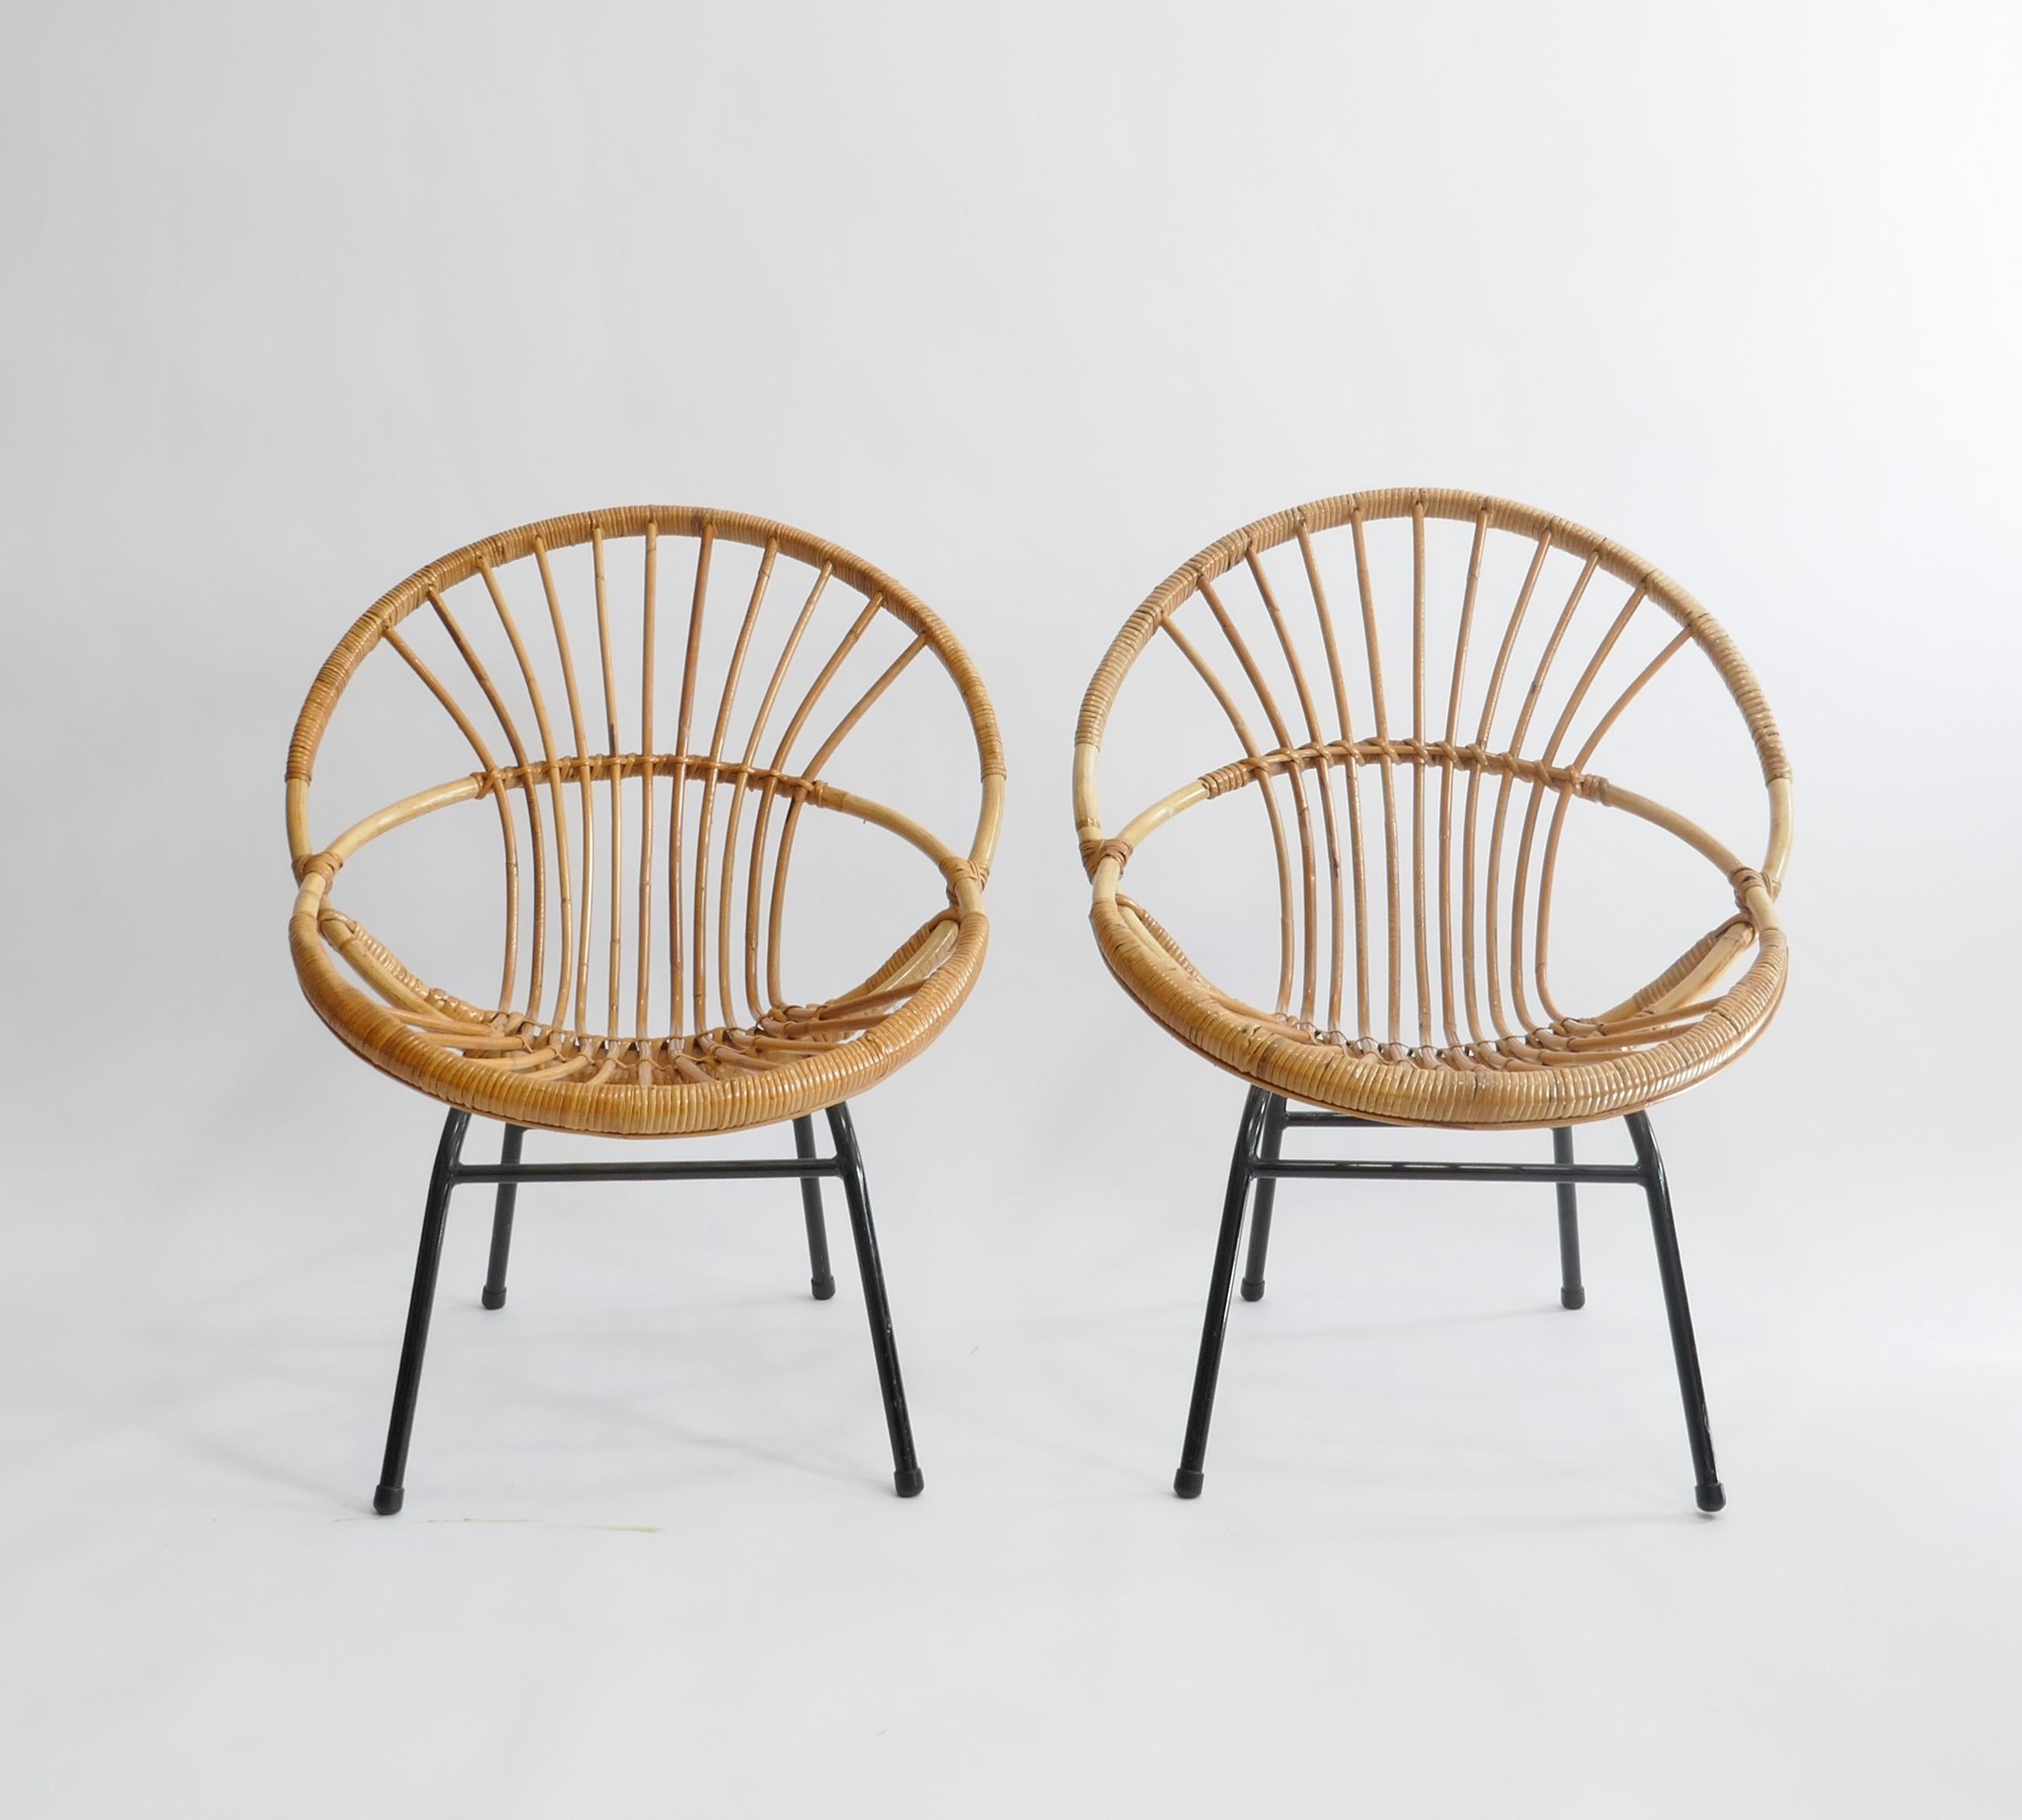 Pair of French Mid-Century Rattan Chairs, France 1950s In Good Condition For Sale In London, GB